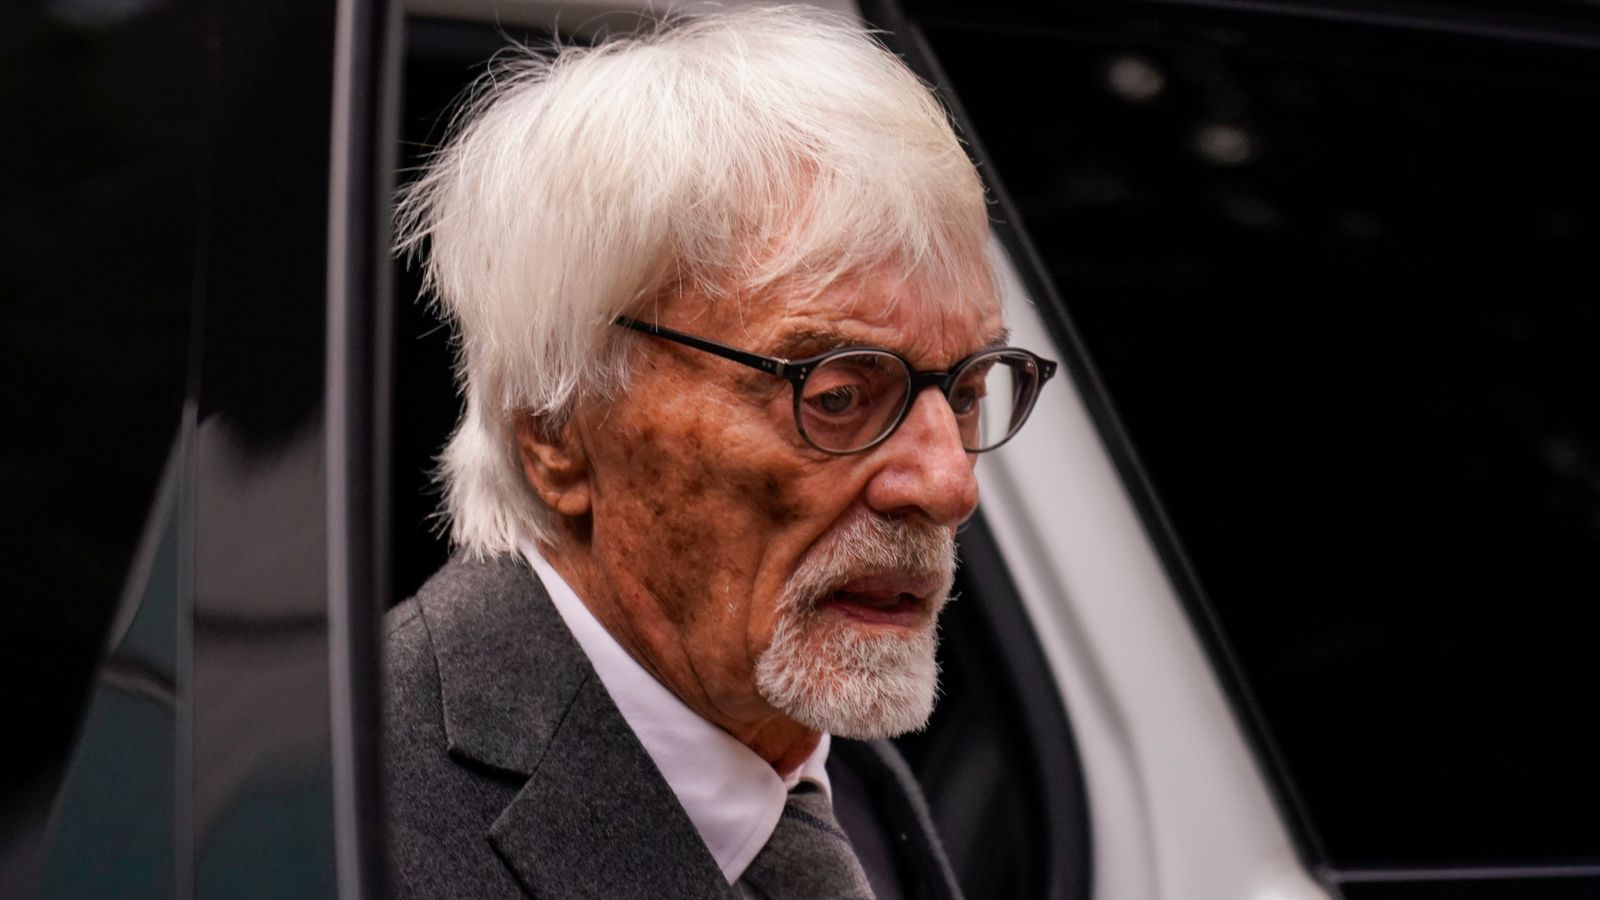 Bernie Ecclestone: Trial date set for ex-F1 boss charged with £400 million fraud